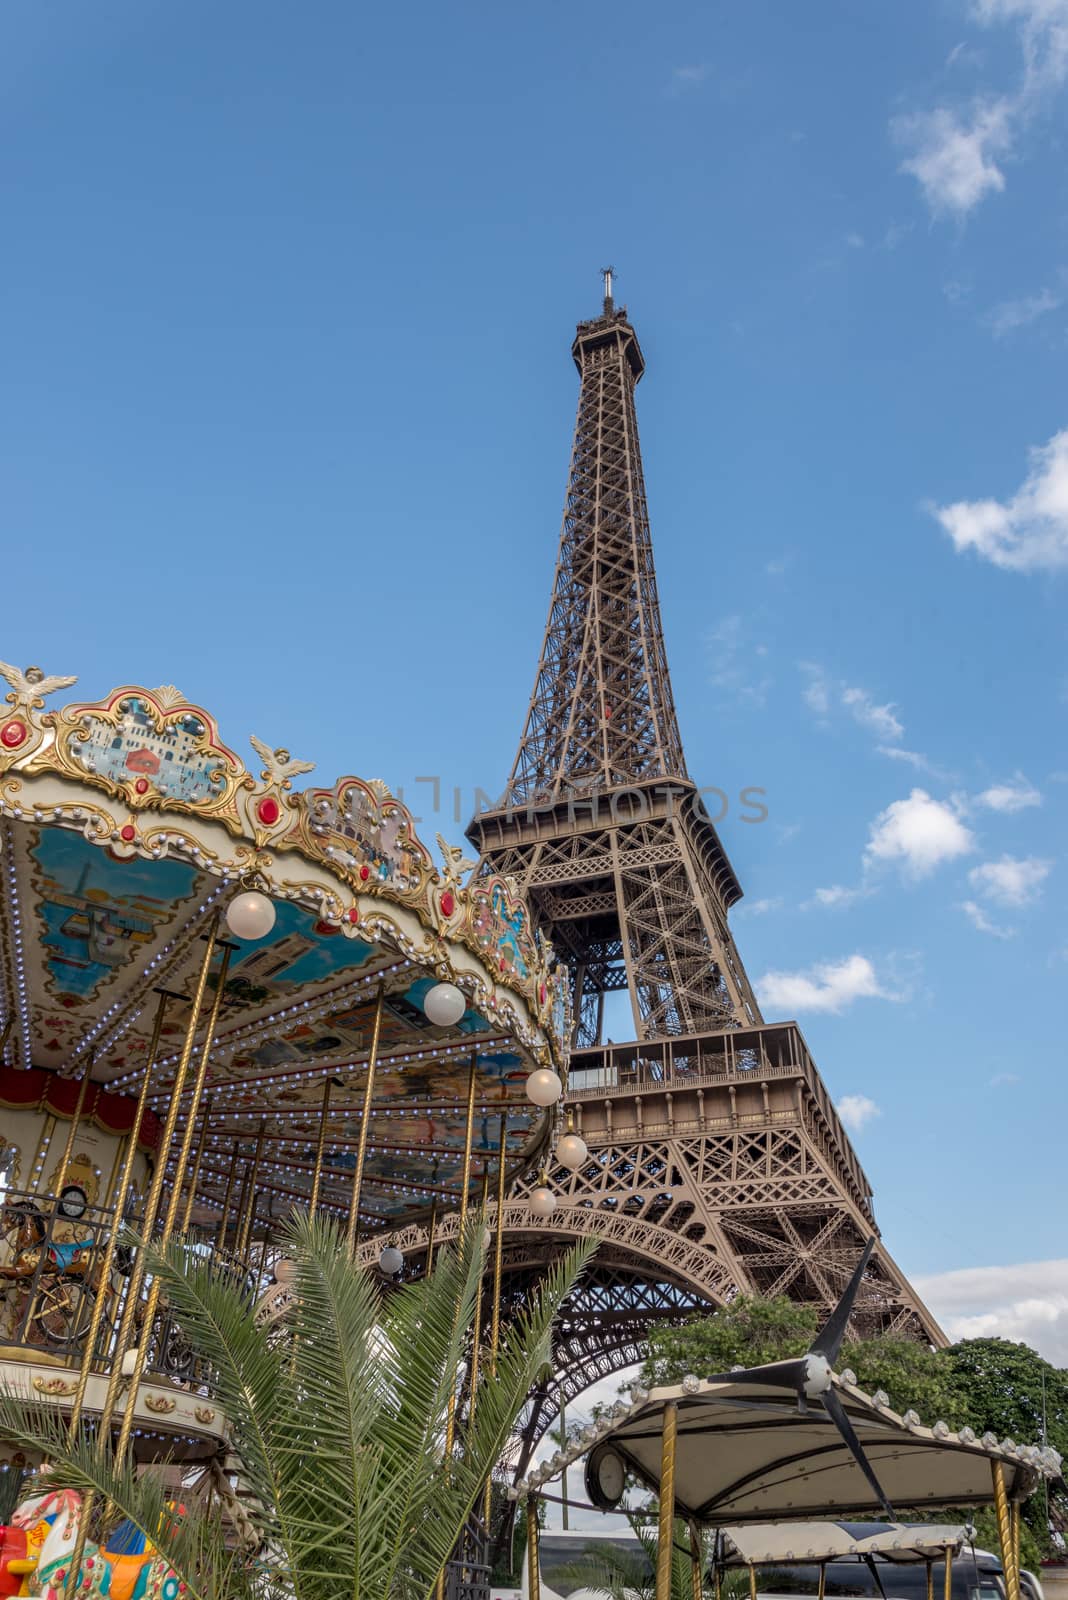 Eiffel Tower and Merry go round by pomemick